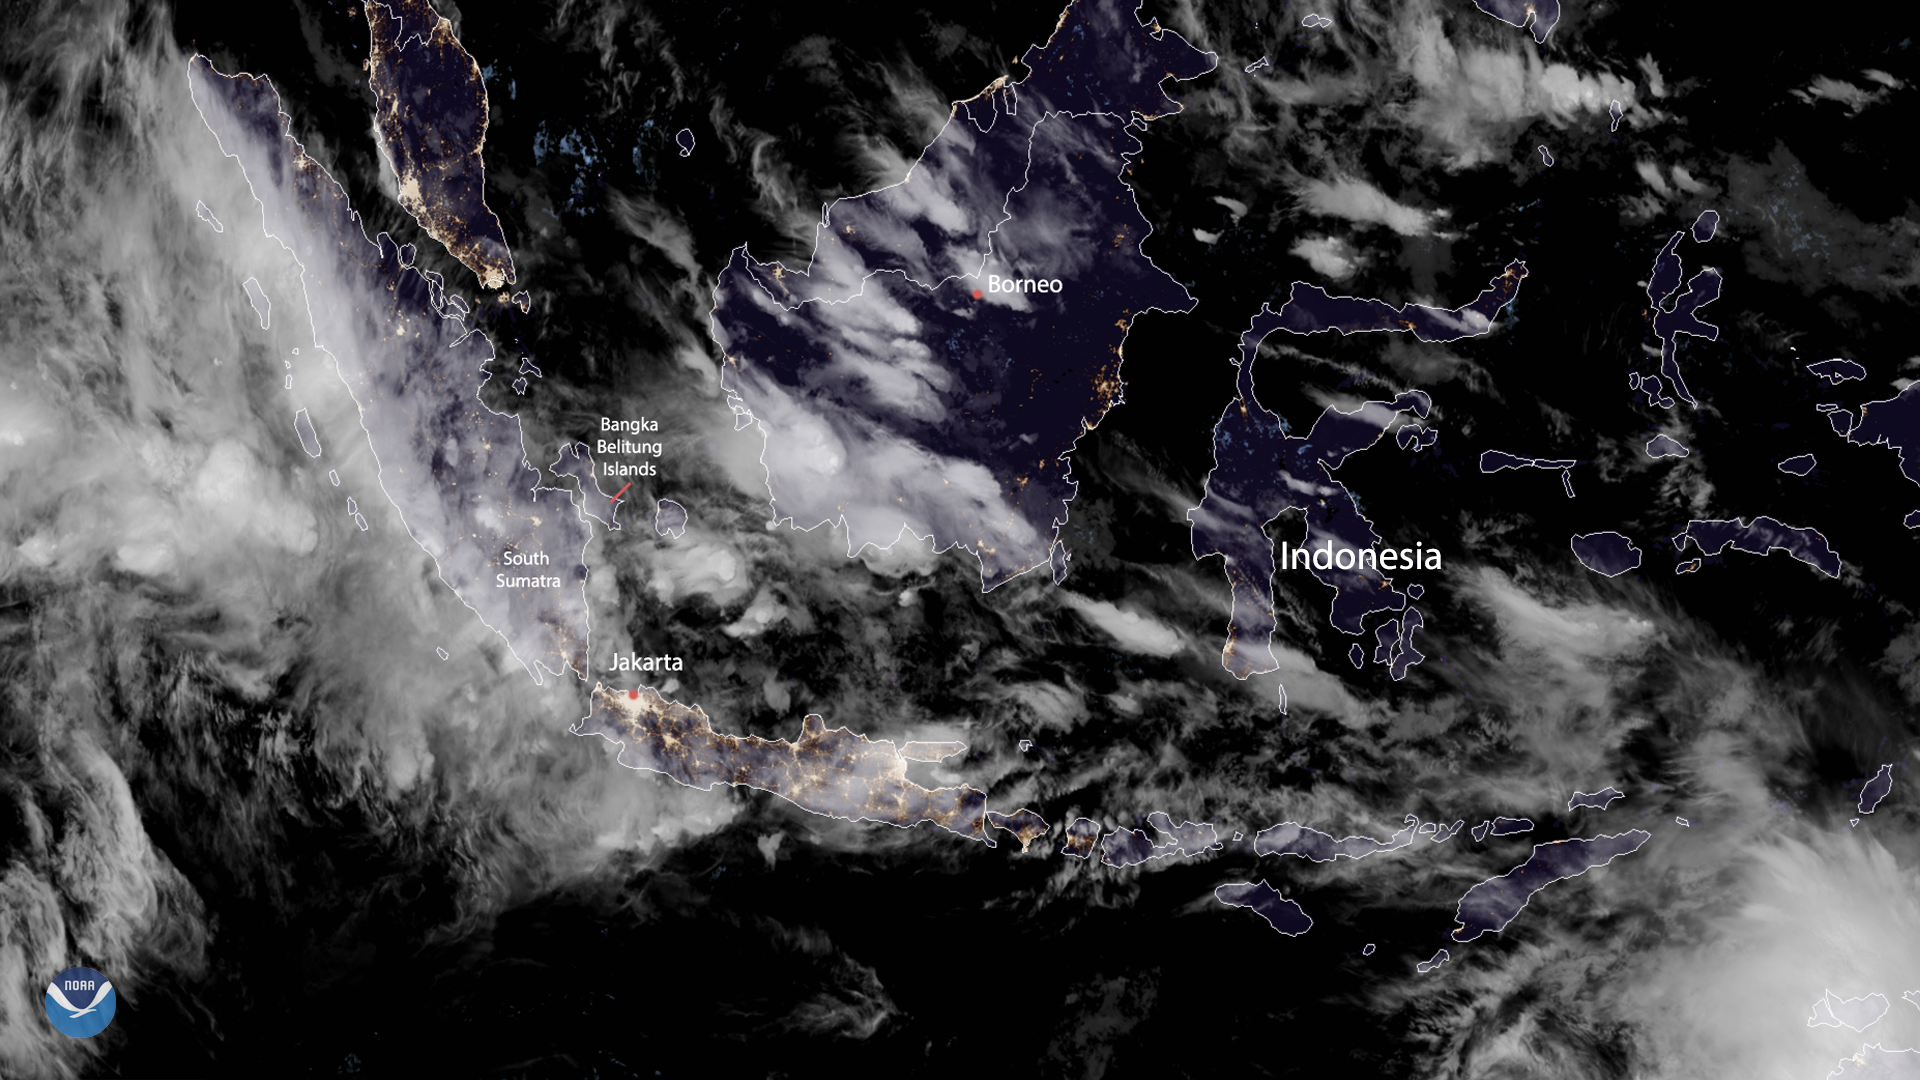 Indonesia Under Heavy Rainfall, Prompting Some Evacuations